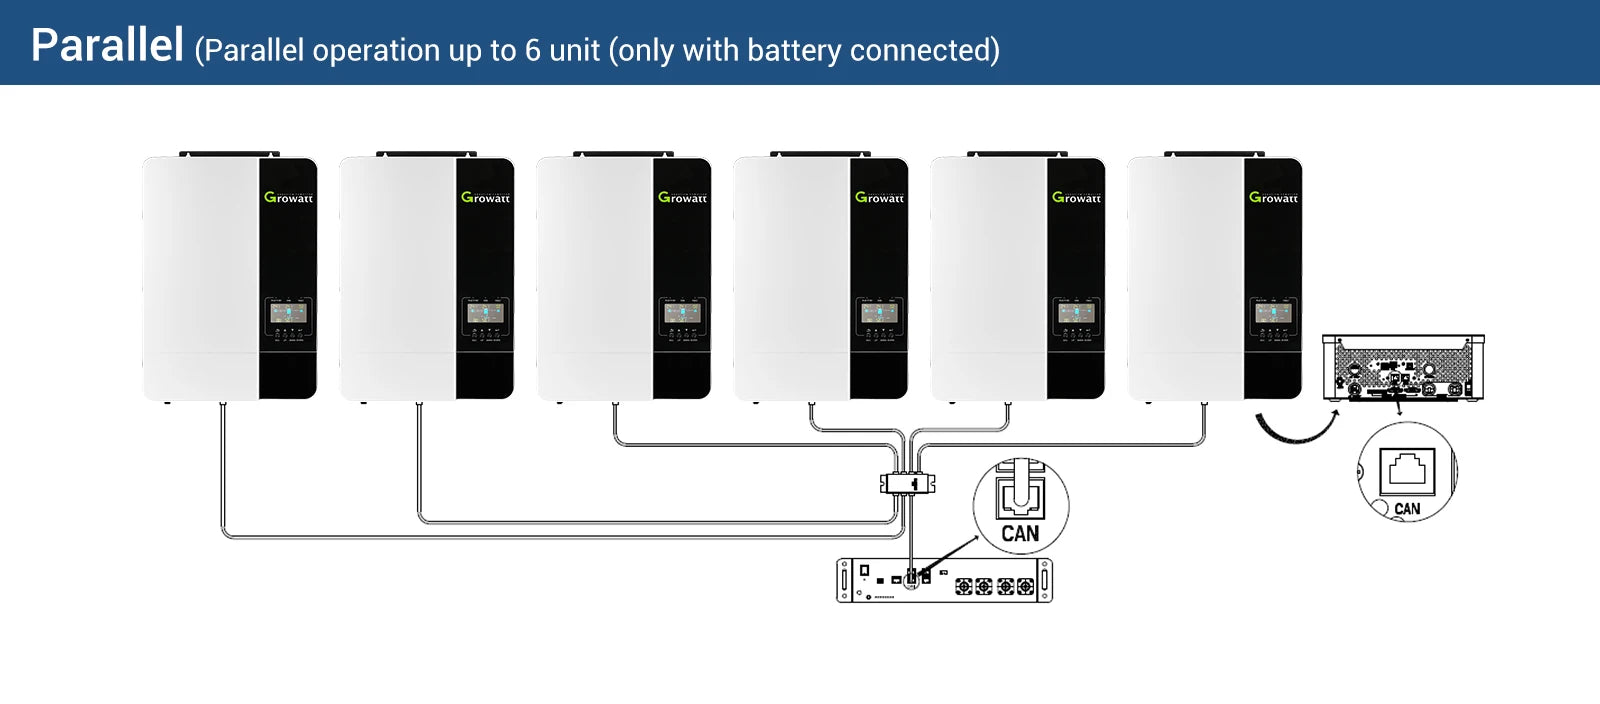 Parallel charging capability allows for increased power output and flexibility with up to 6 solar chargers connected.